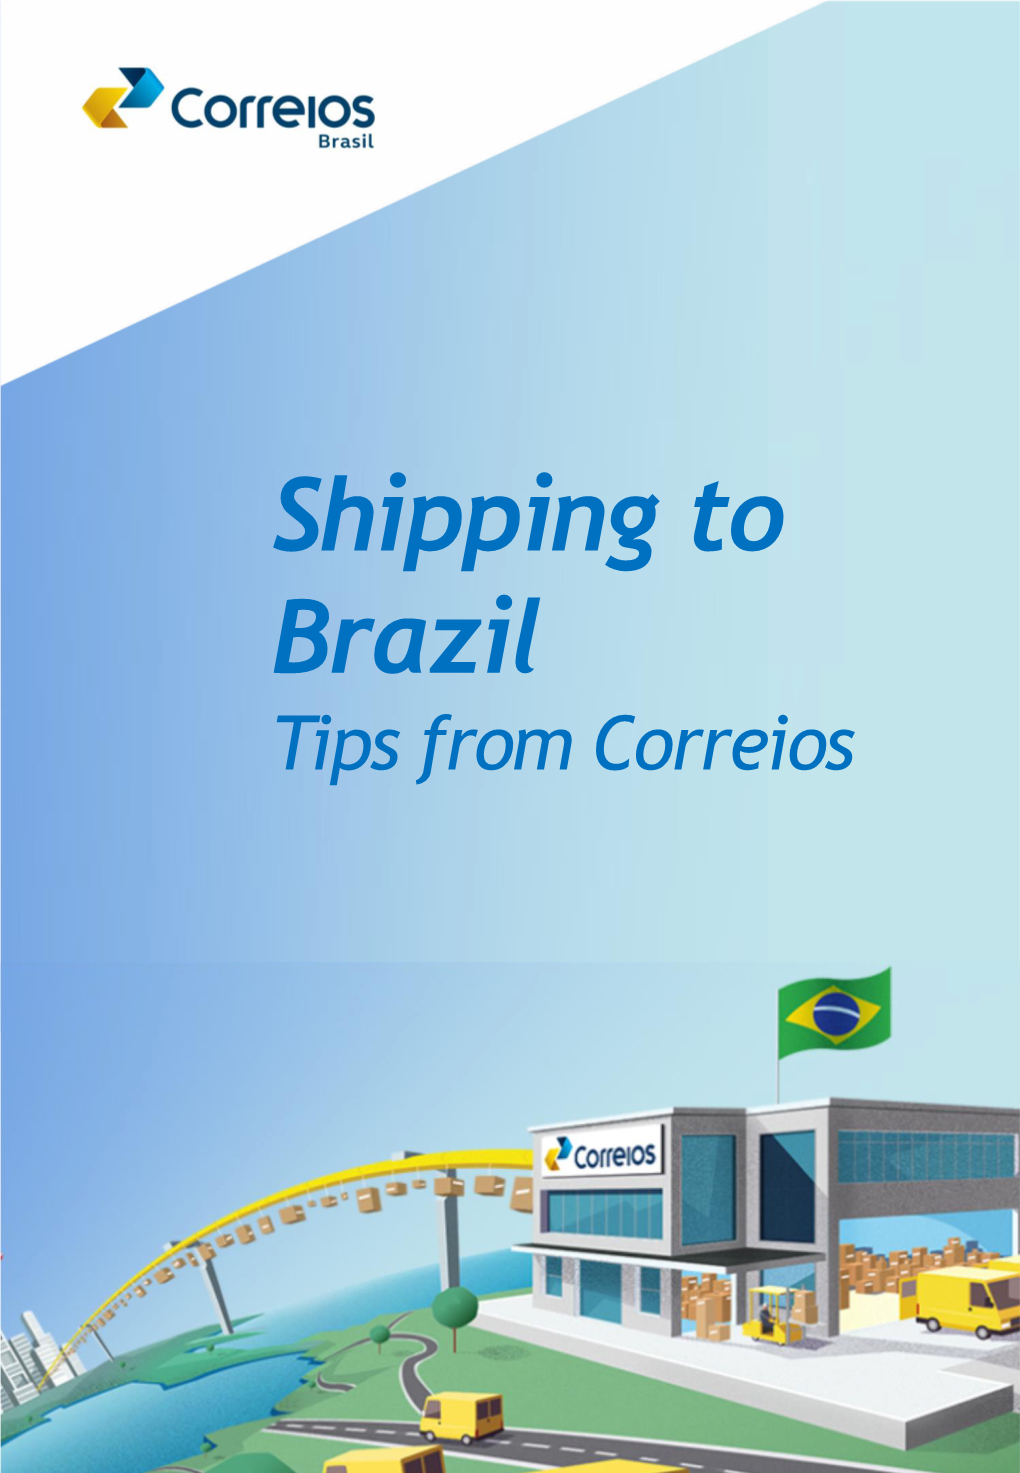 Shipping to Brazil, Keep in Mind That…